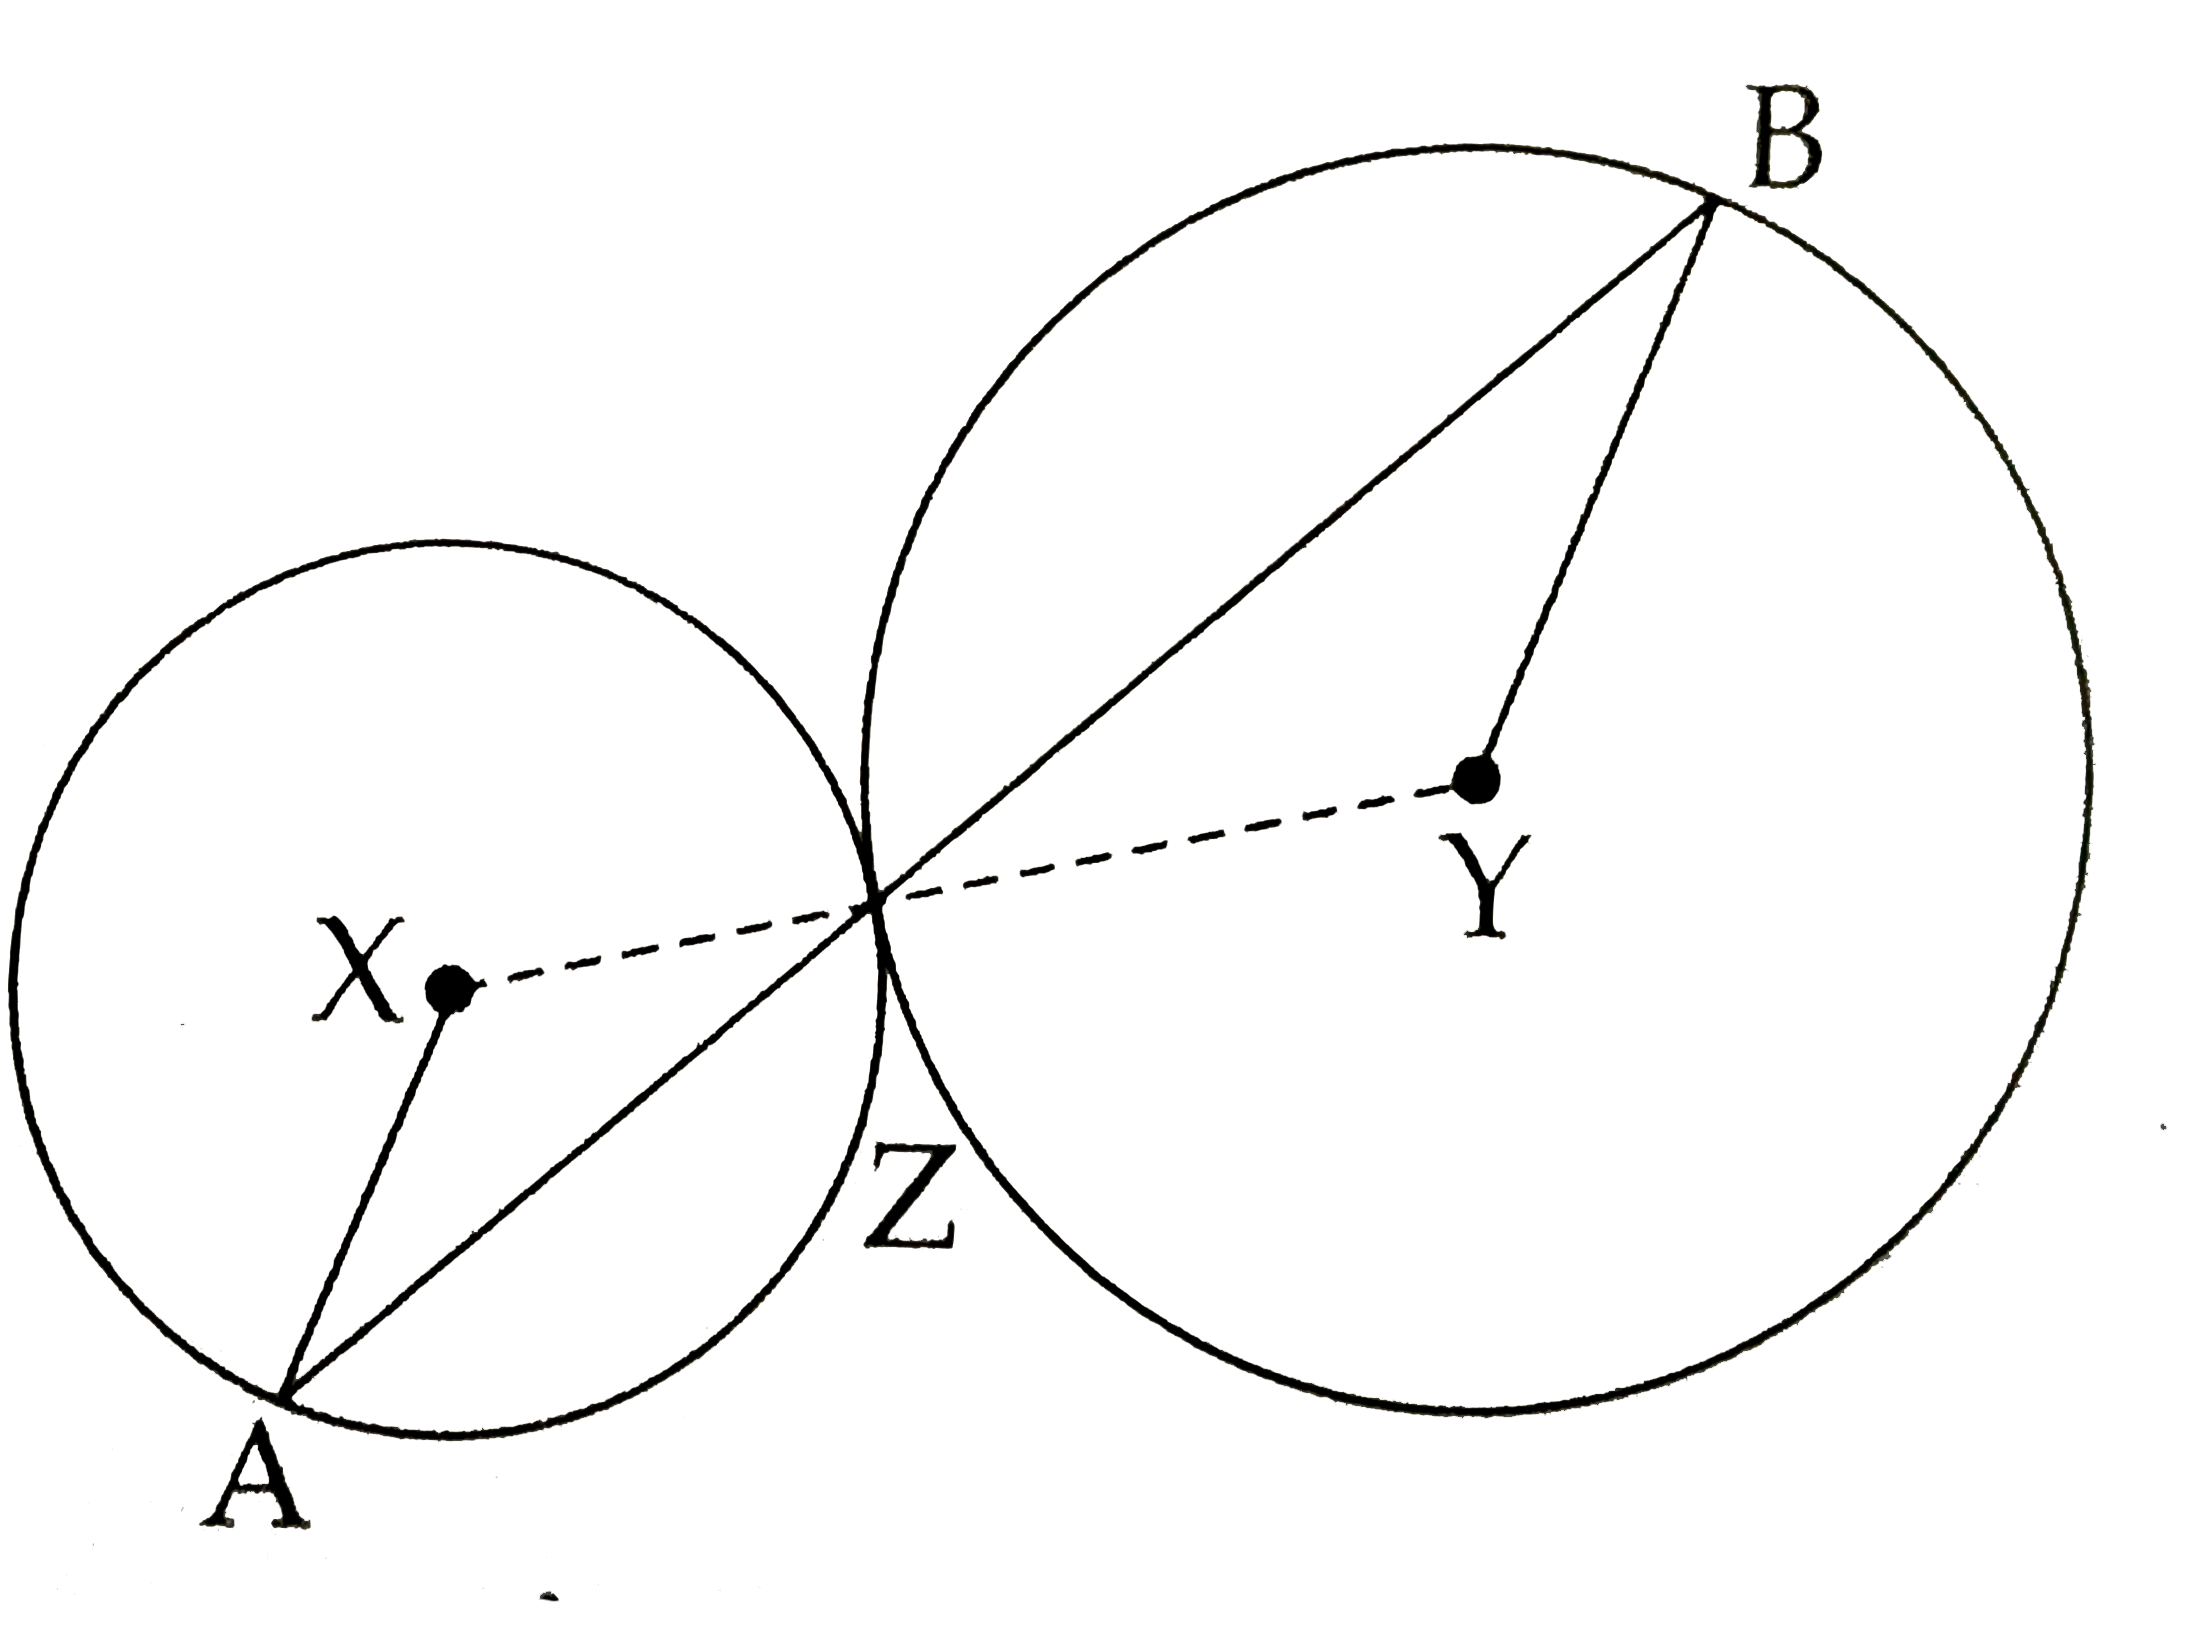 In  the adjoining fig. circles with centres X , Y touch each other at Z . A secant  passing through Z meets the circles at A and B respectively. Prove that, radius X A ||  radius YB. Fill  in the blanks and complete the proof.